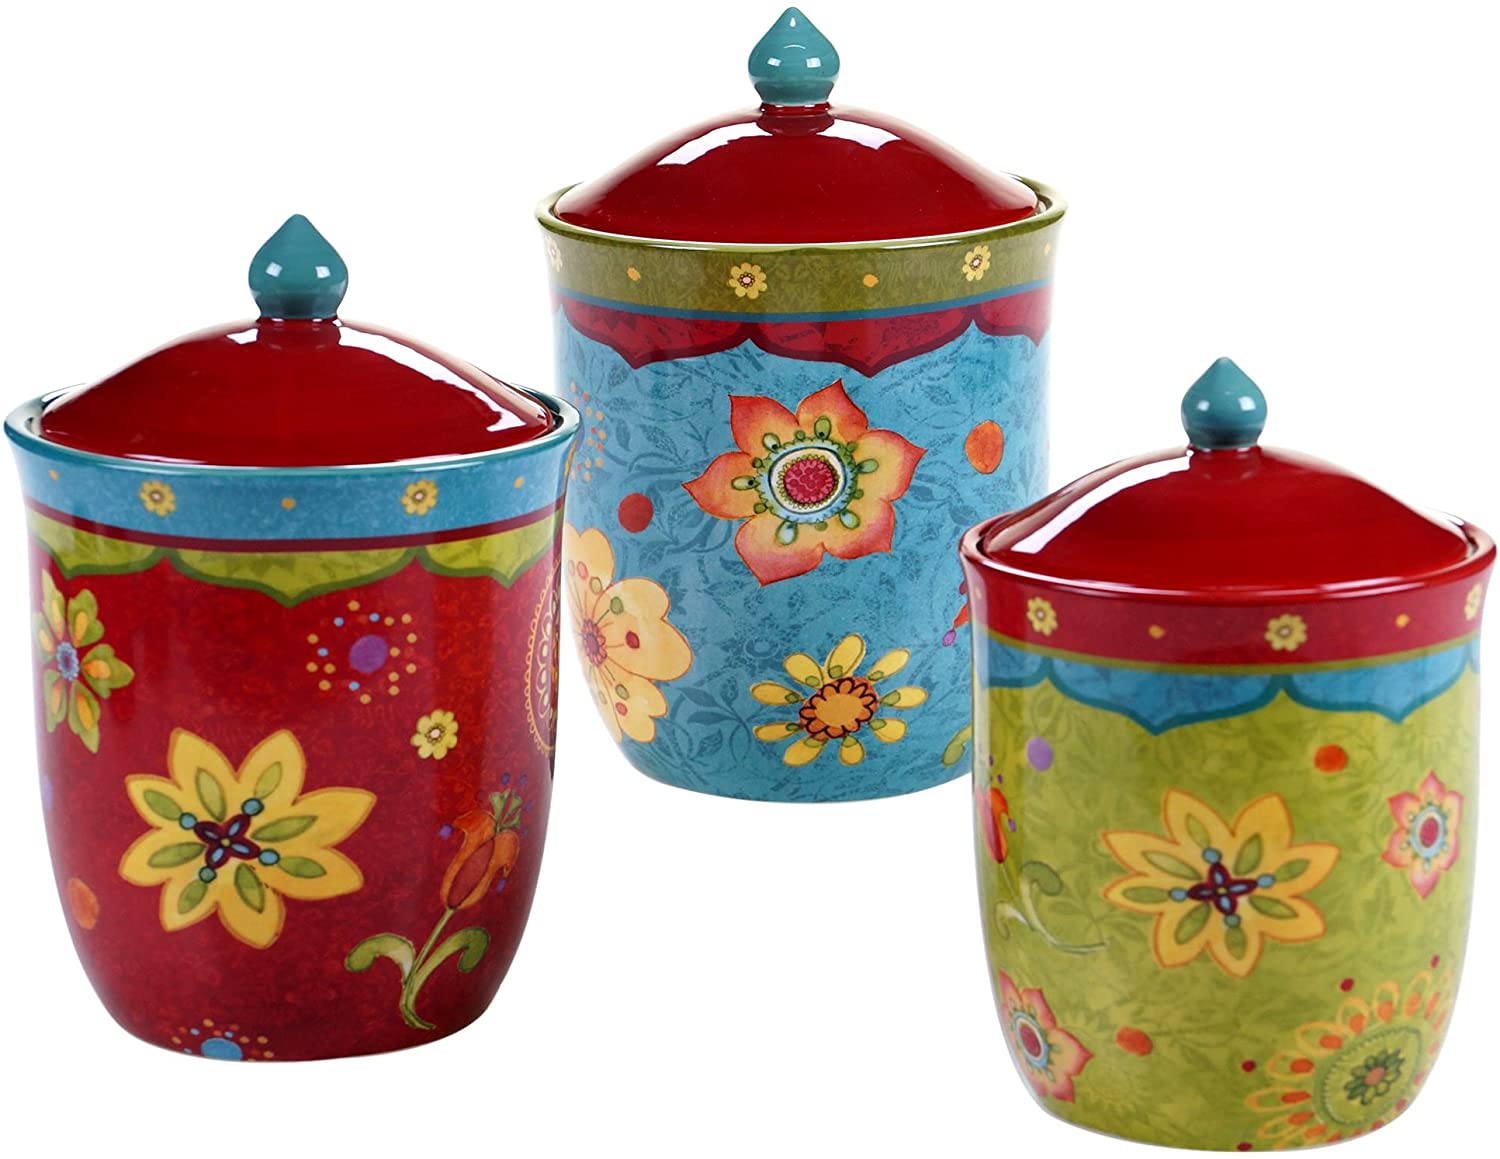 Decorative 3 Piece Ceramic Kitchen Canister Sets Designs You Ll Love Decorating Ideas And Accessories For The Home Creative Ideas For Every Room